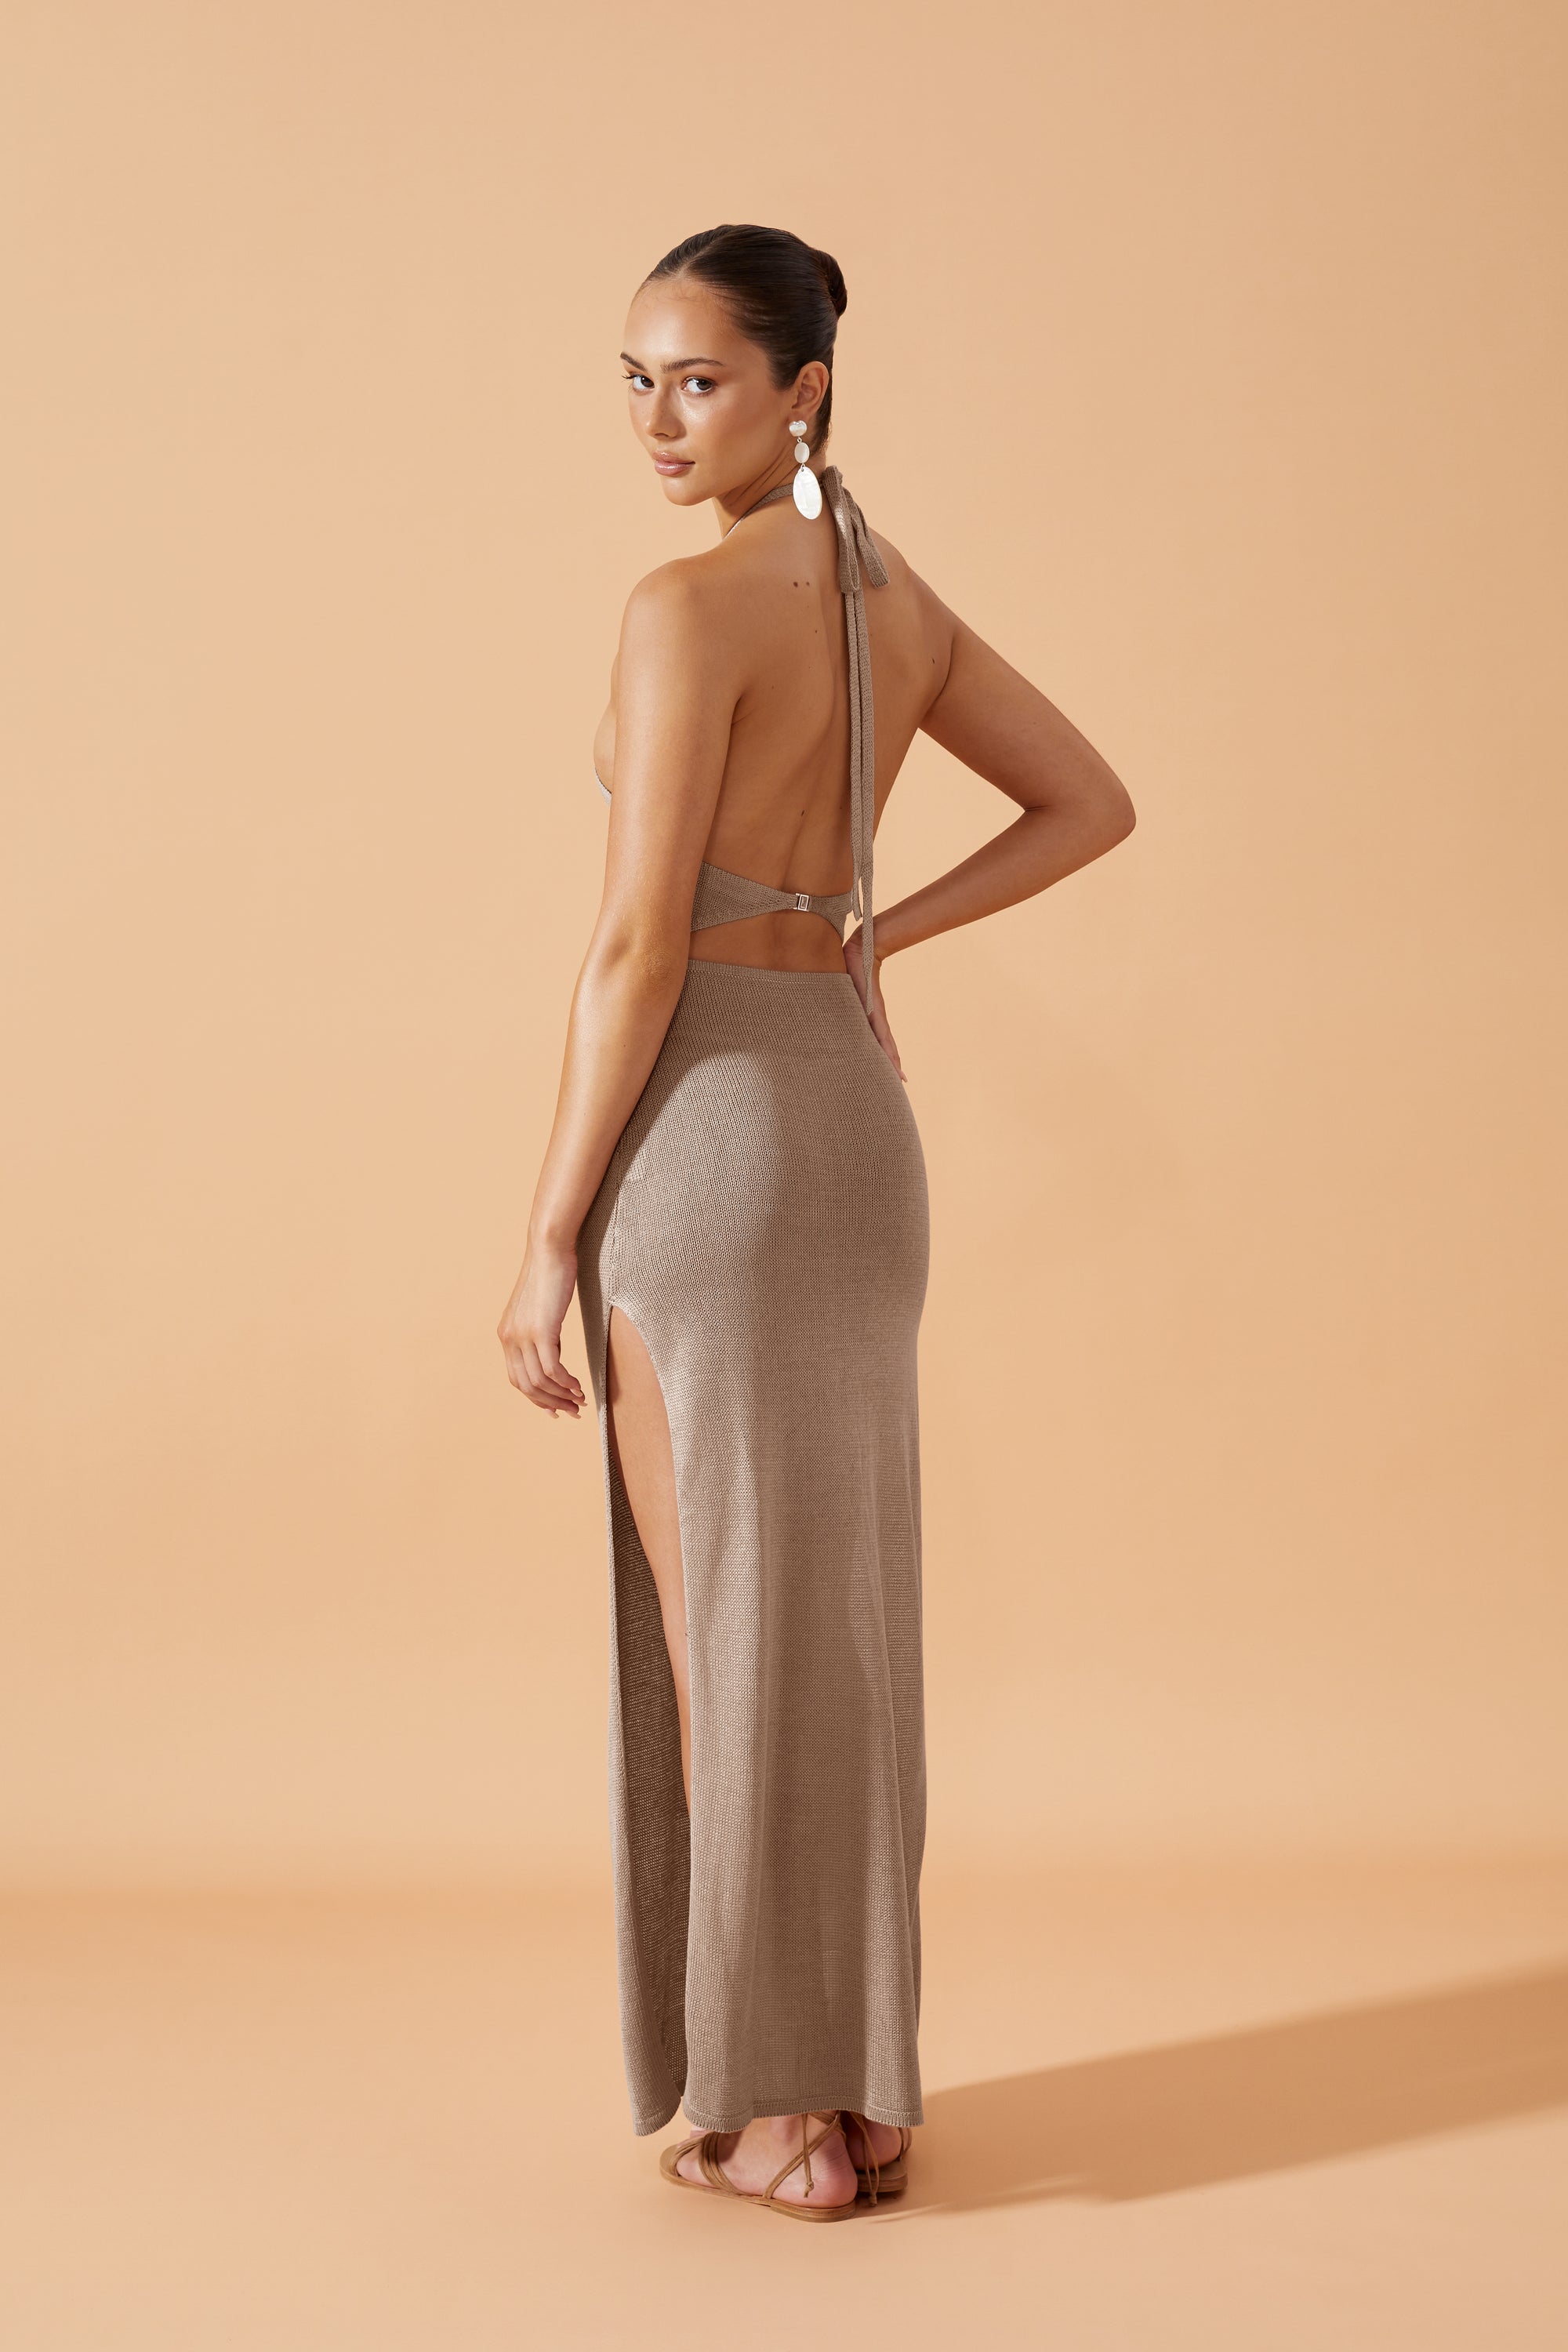 Flook The Label Lua Knit Long Dress in Taupe. Open front crossed at the neck and  closed with a clasp. Splits on both sides. Back View